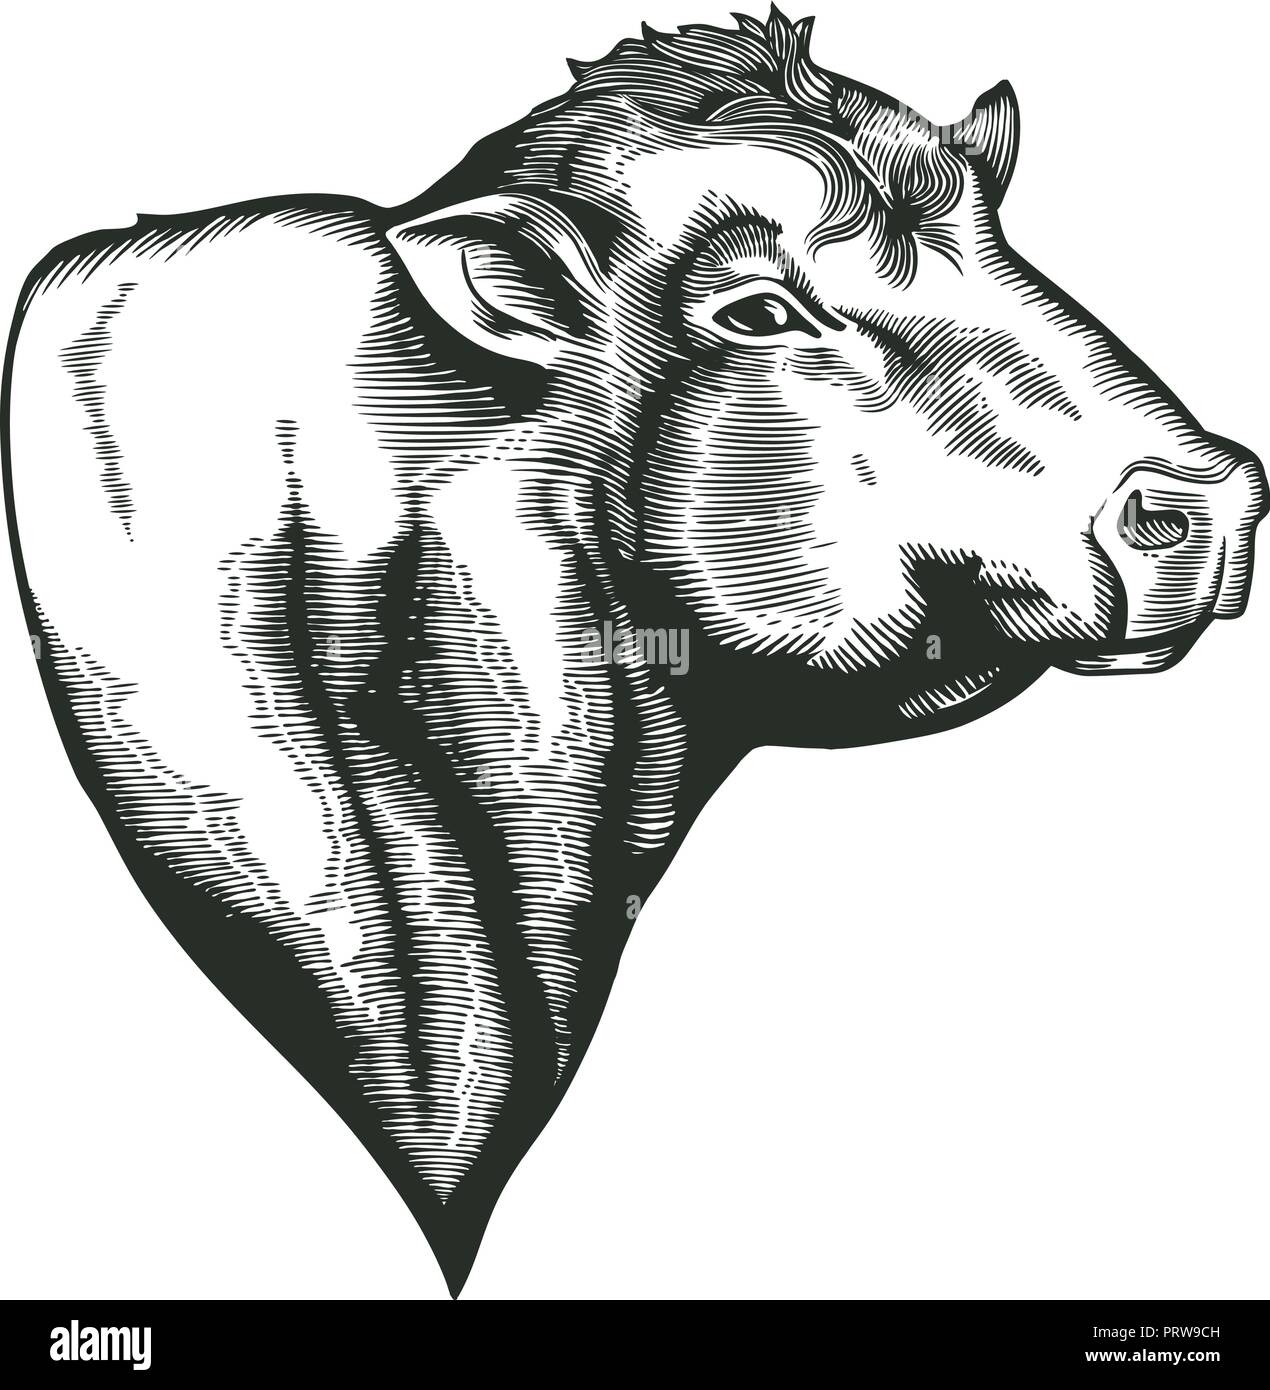 Head of bull of dangus breed drawn in vintage woodcut style. Farm animal isolated on white background. Vector illustration for agricultural market identity, products logo, advertisement. Stock Vector